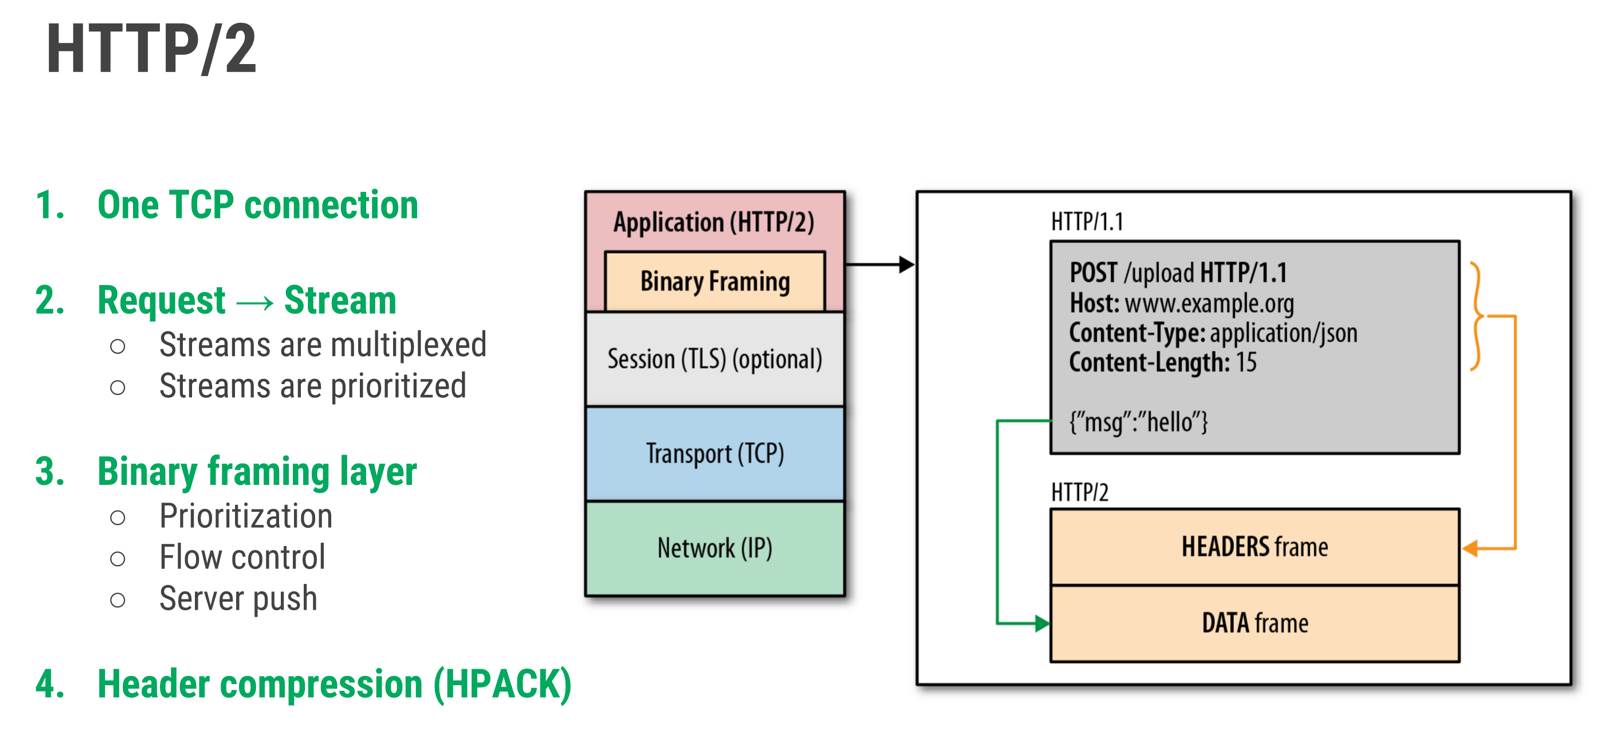 HTTP/2 Overview